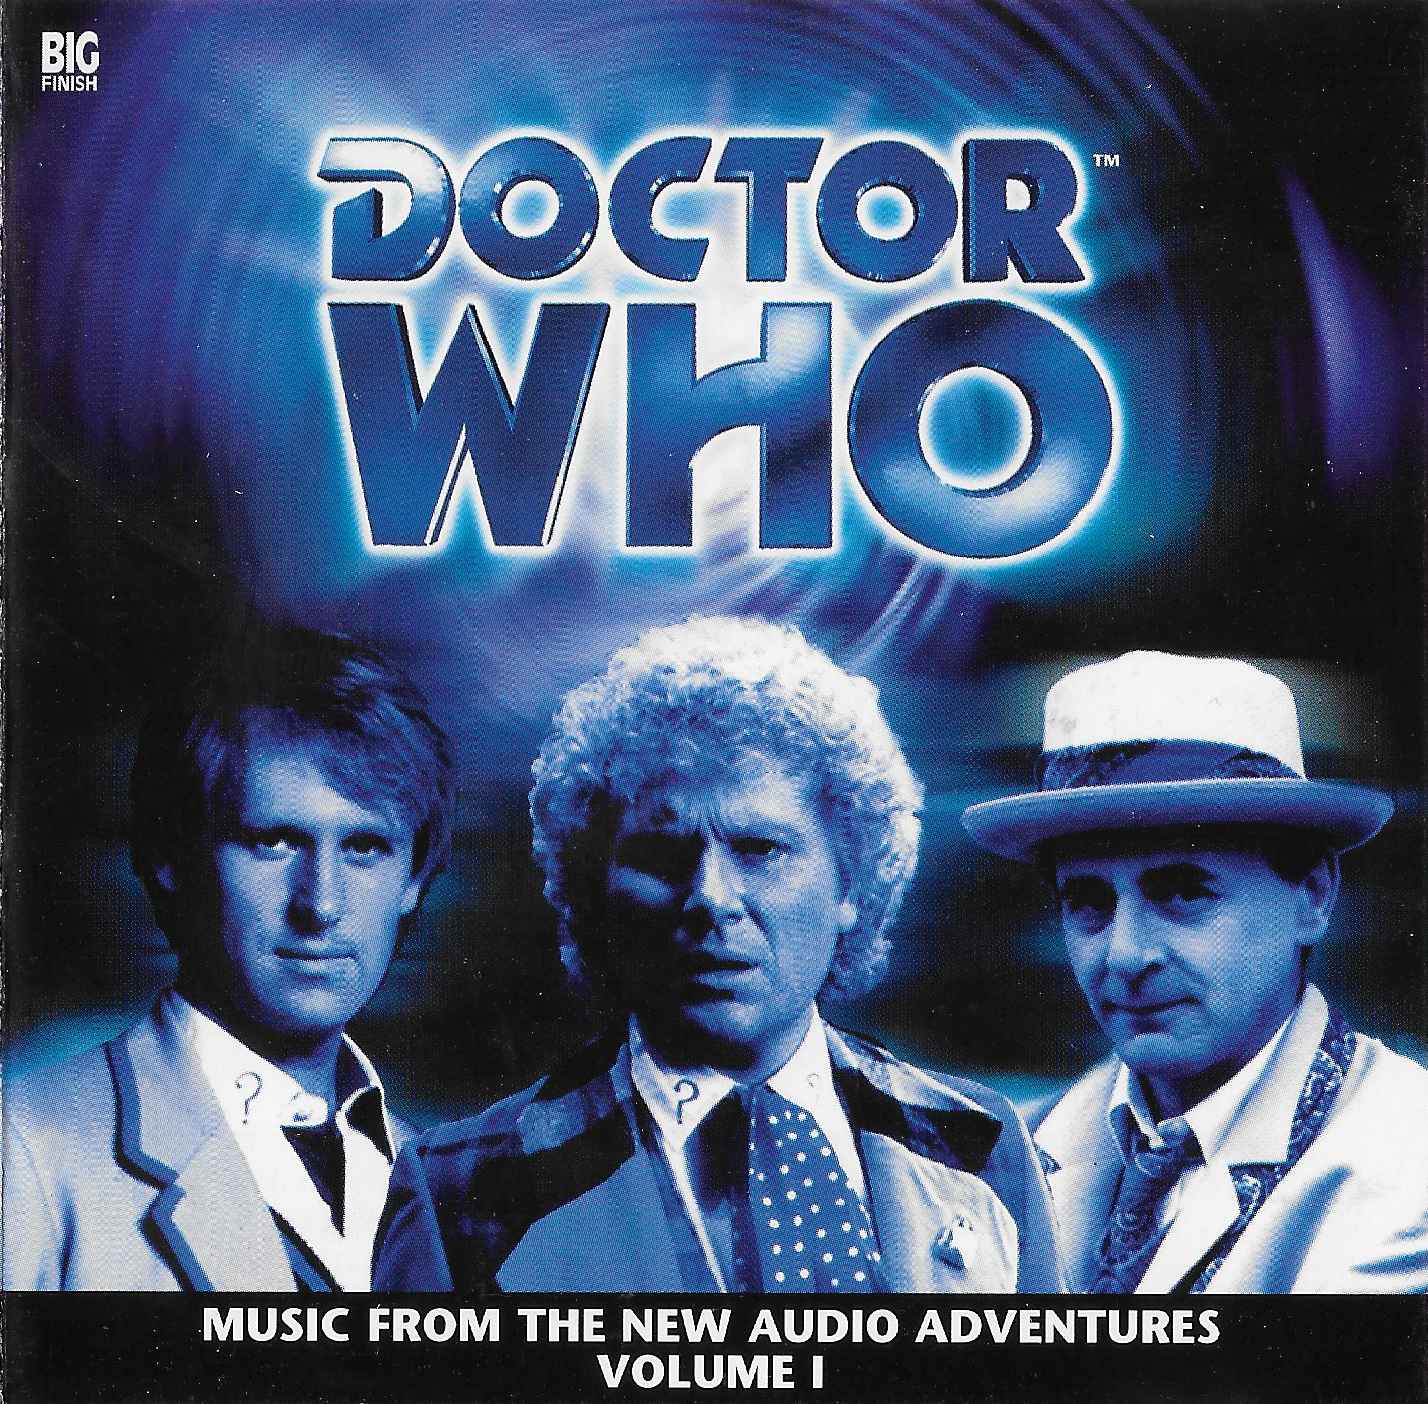 Picture of Doctor Who - Music from the new adventures - Volume 1 by artist Alistair Lock from the BBC cds - Records and Tapes library